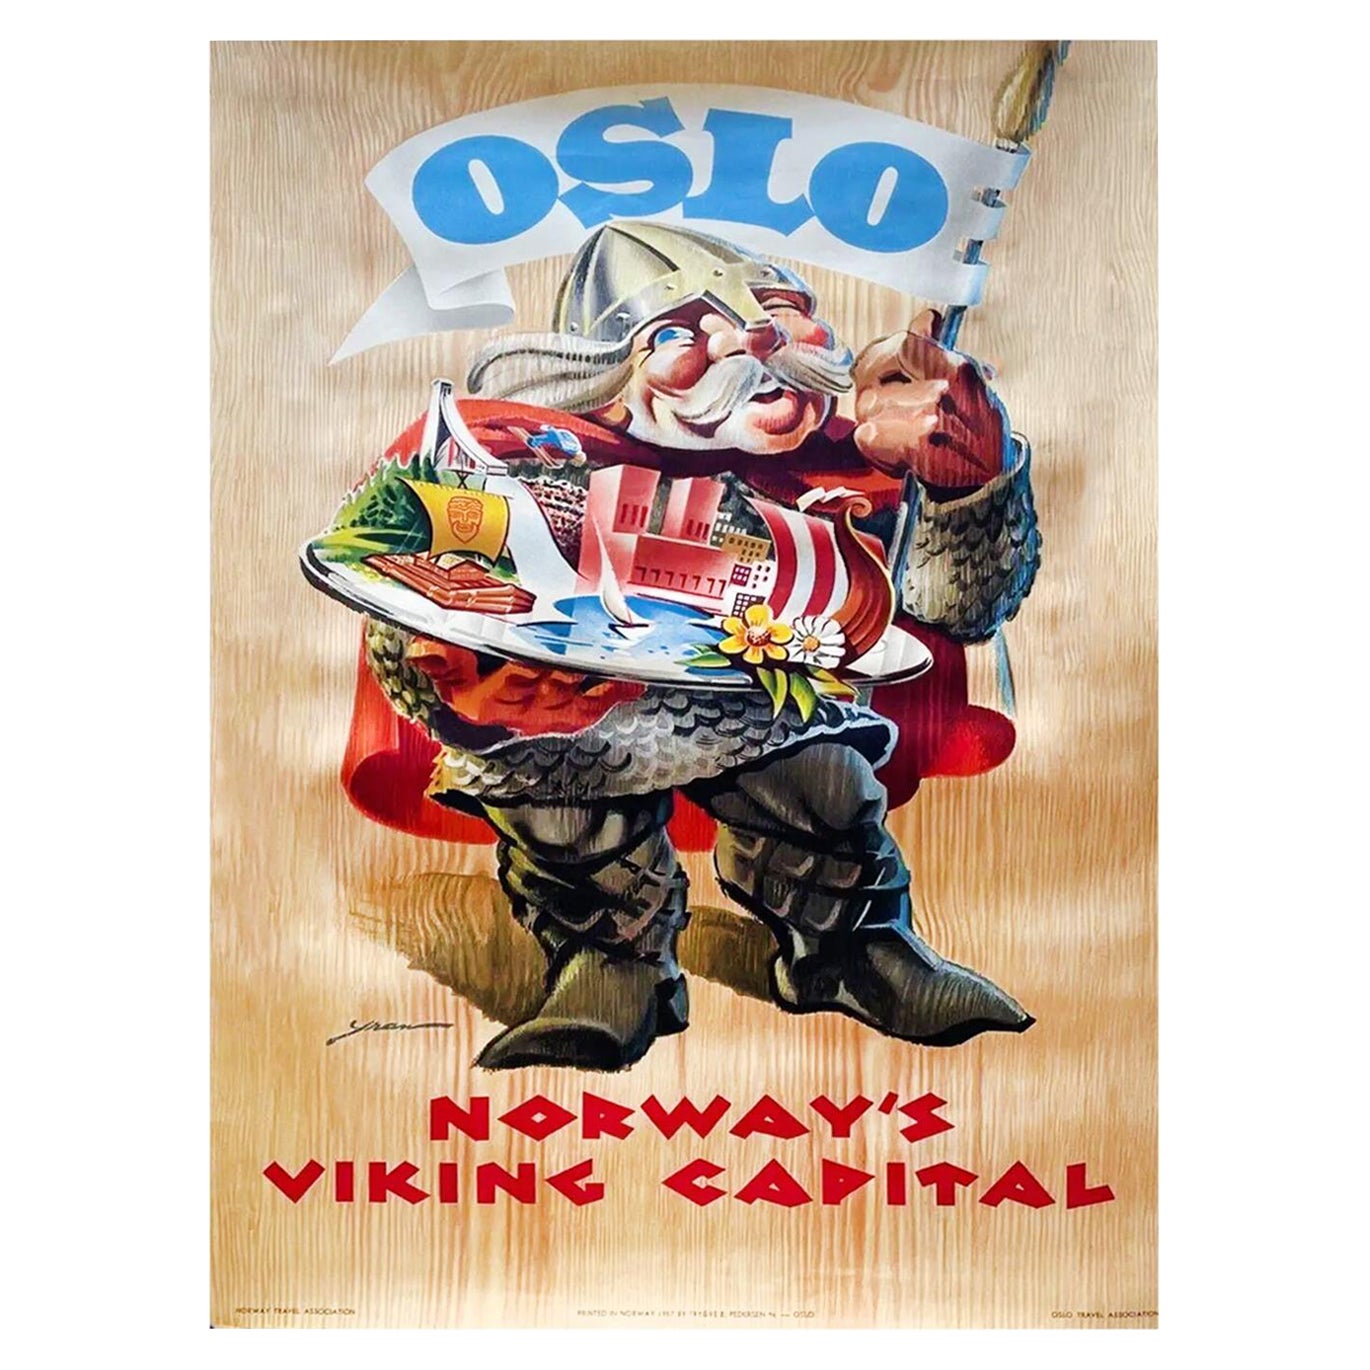 1957 Oslo - Norway's Viking Capital Original Vintage Poster For Sale